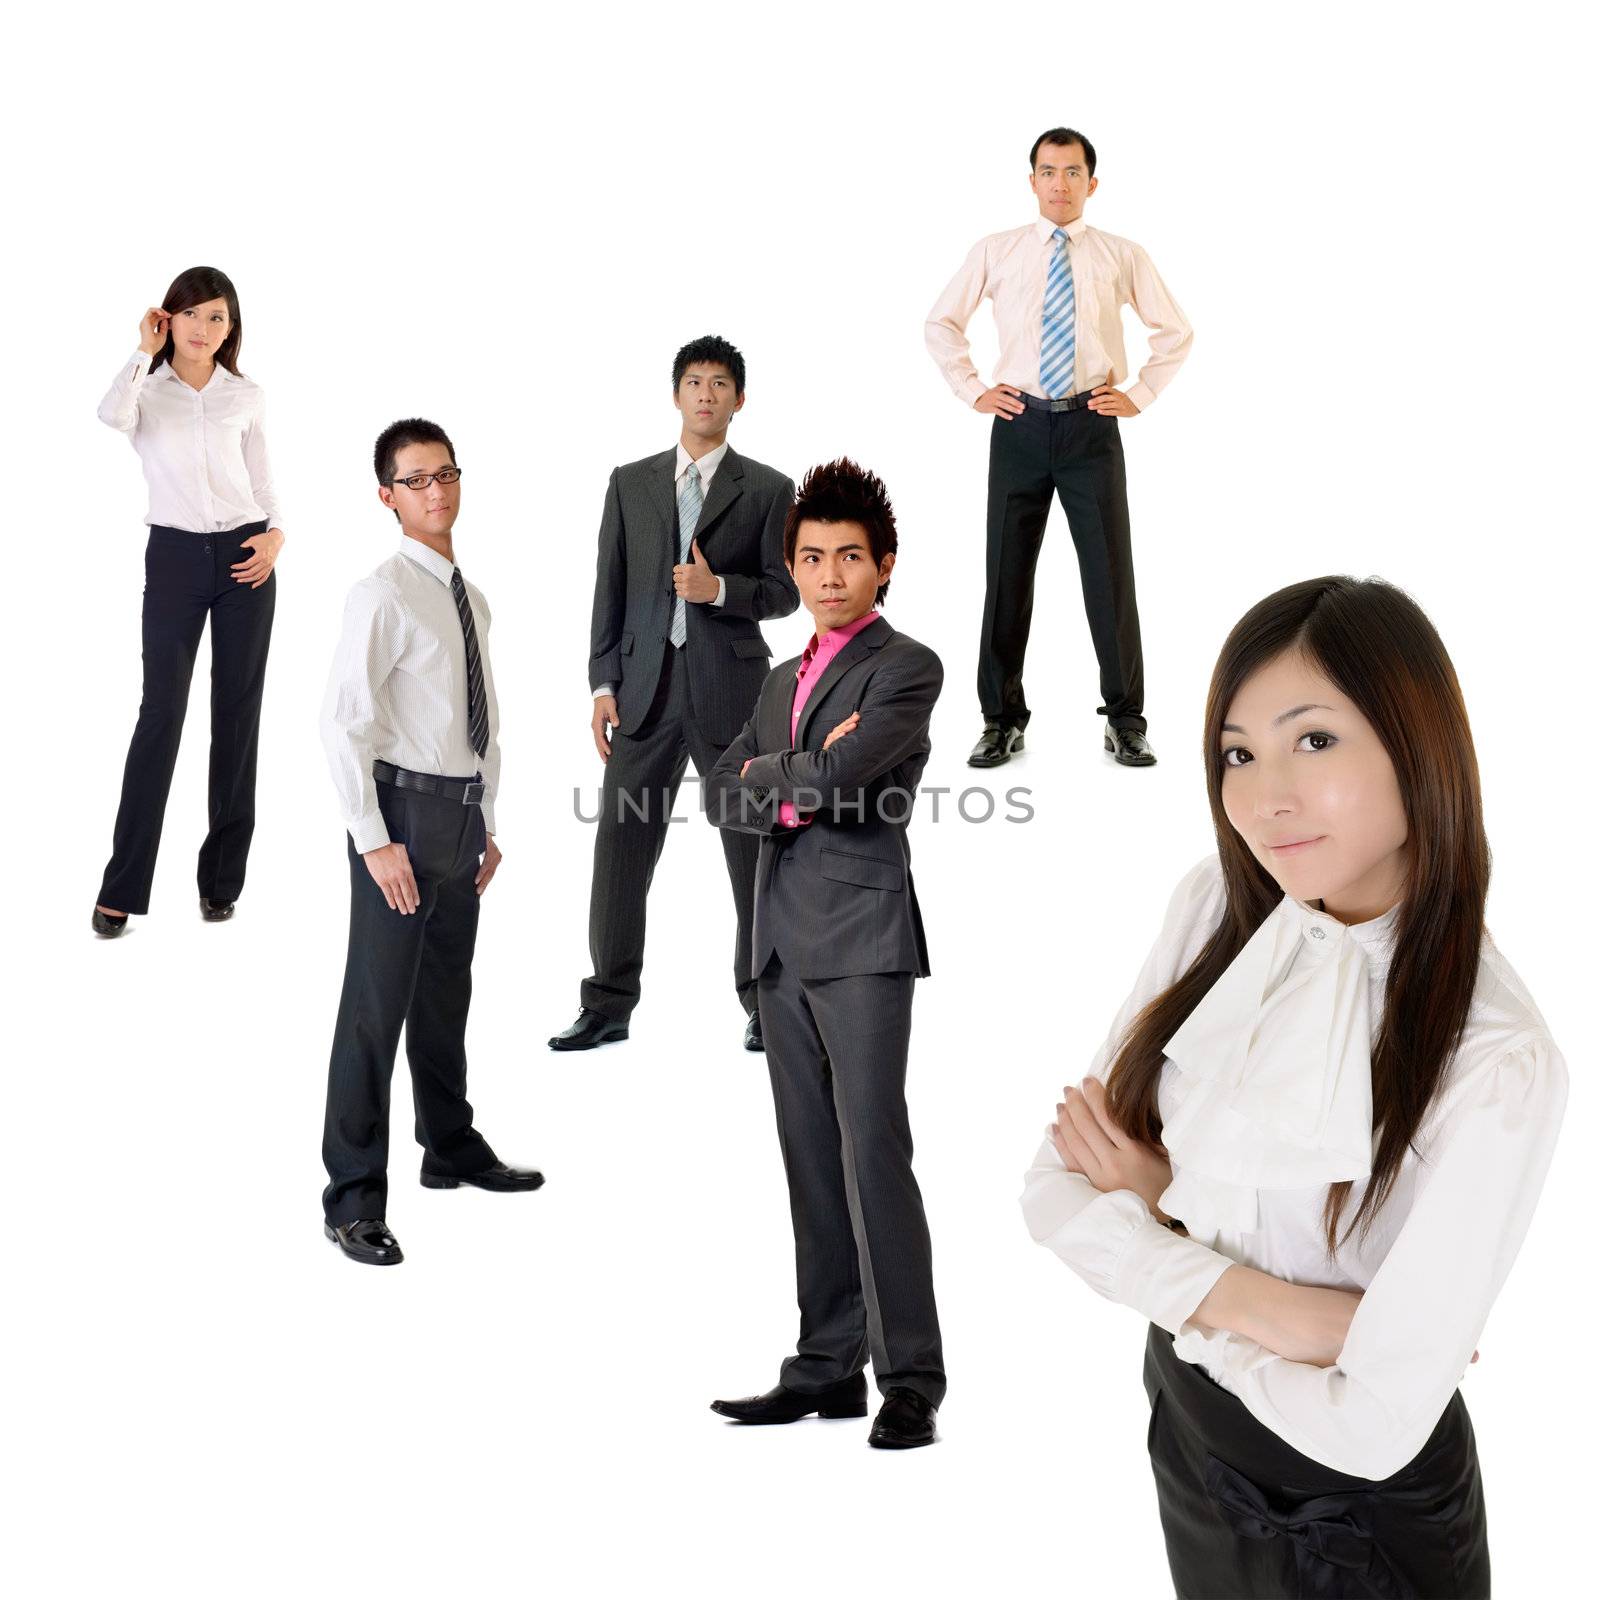 Young business woman and her team over white background, focus on woman in front.